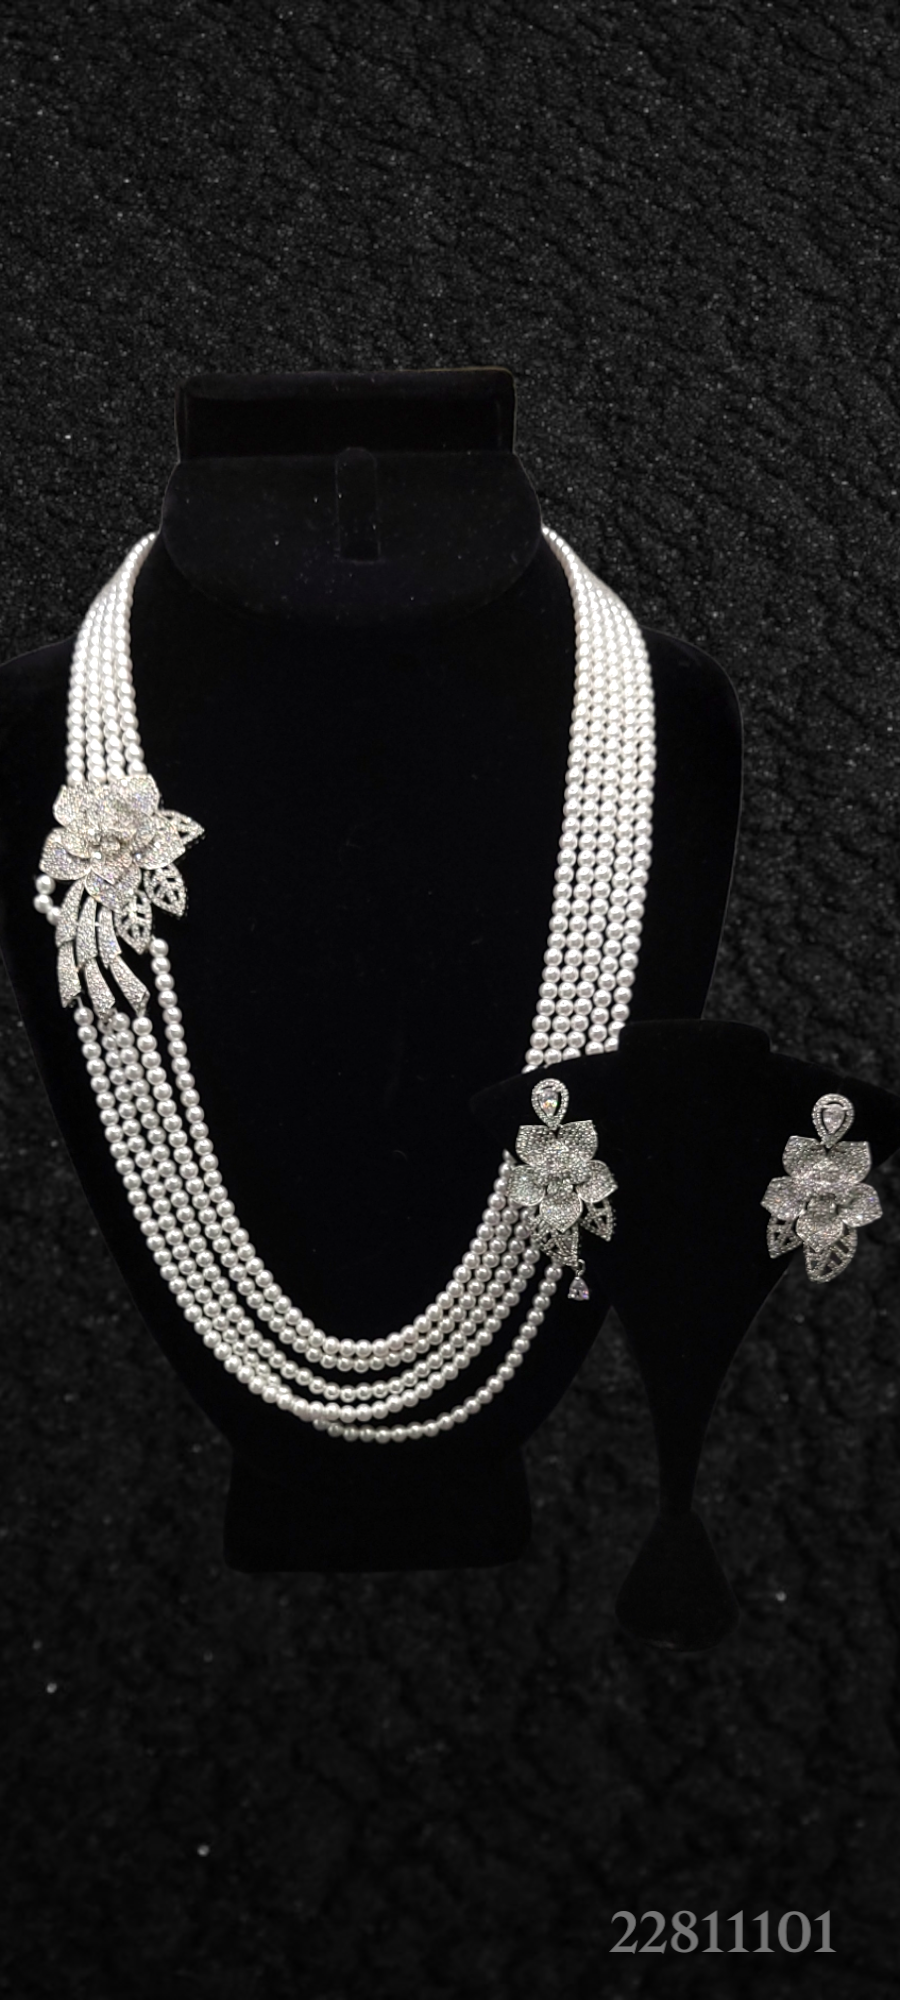 UNIQUE PEARLS AND FLORAL DIAMOND DESIGN NECKLACE SET WITH EARRINGS